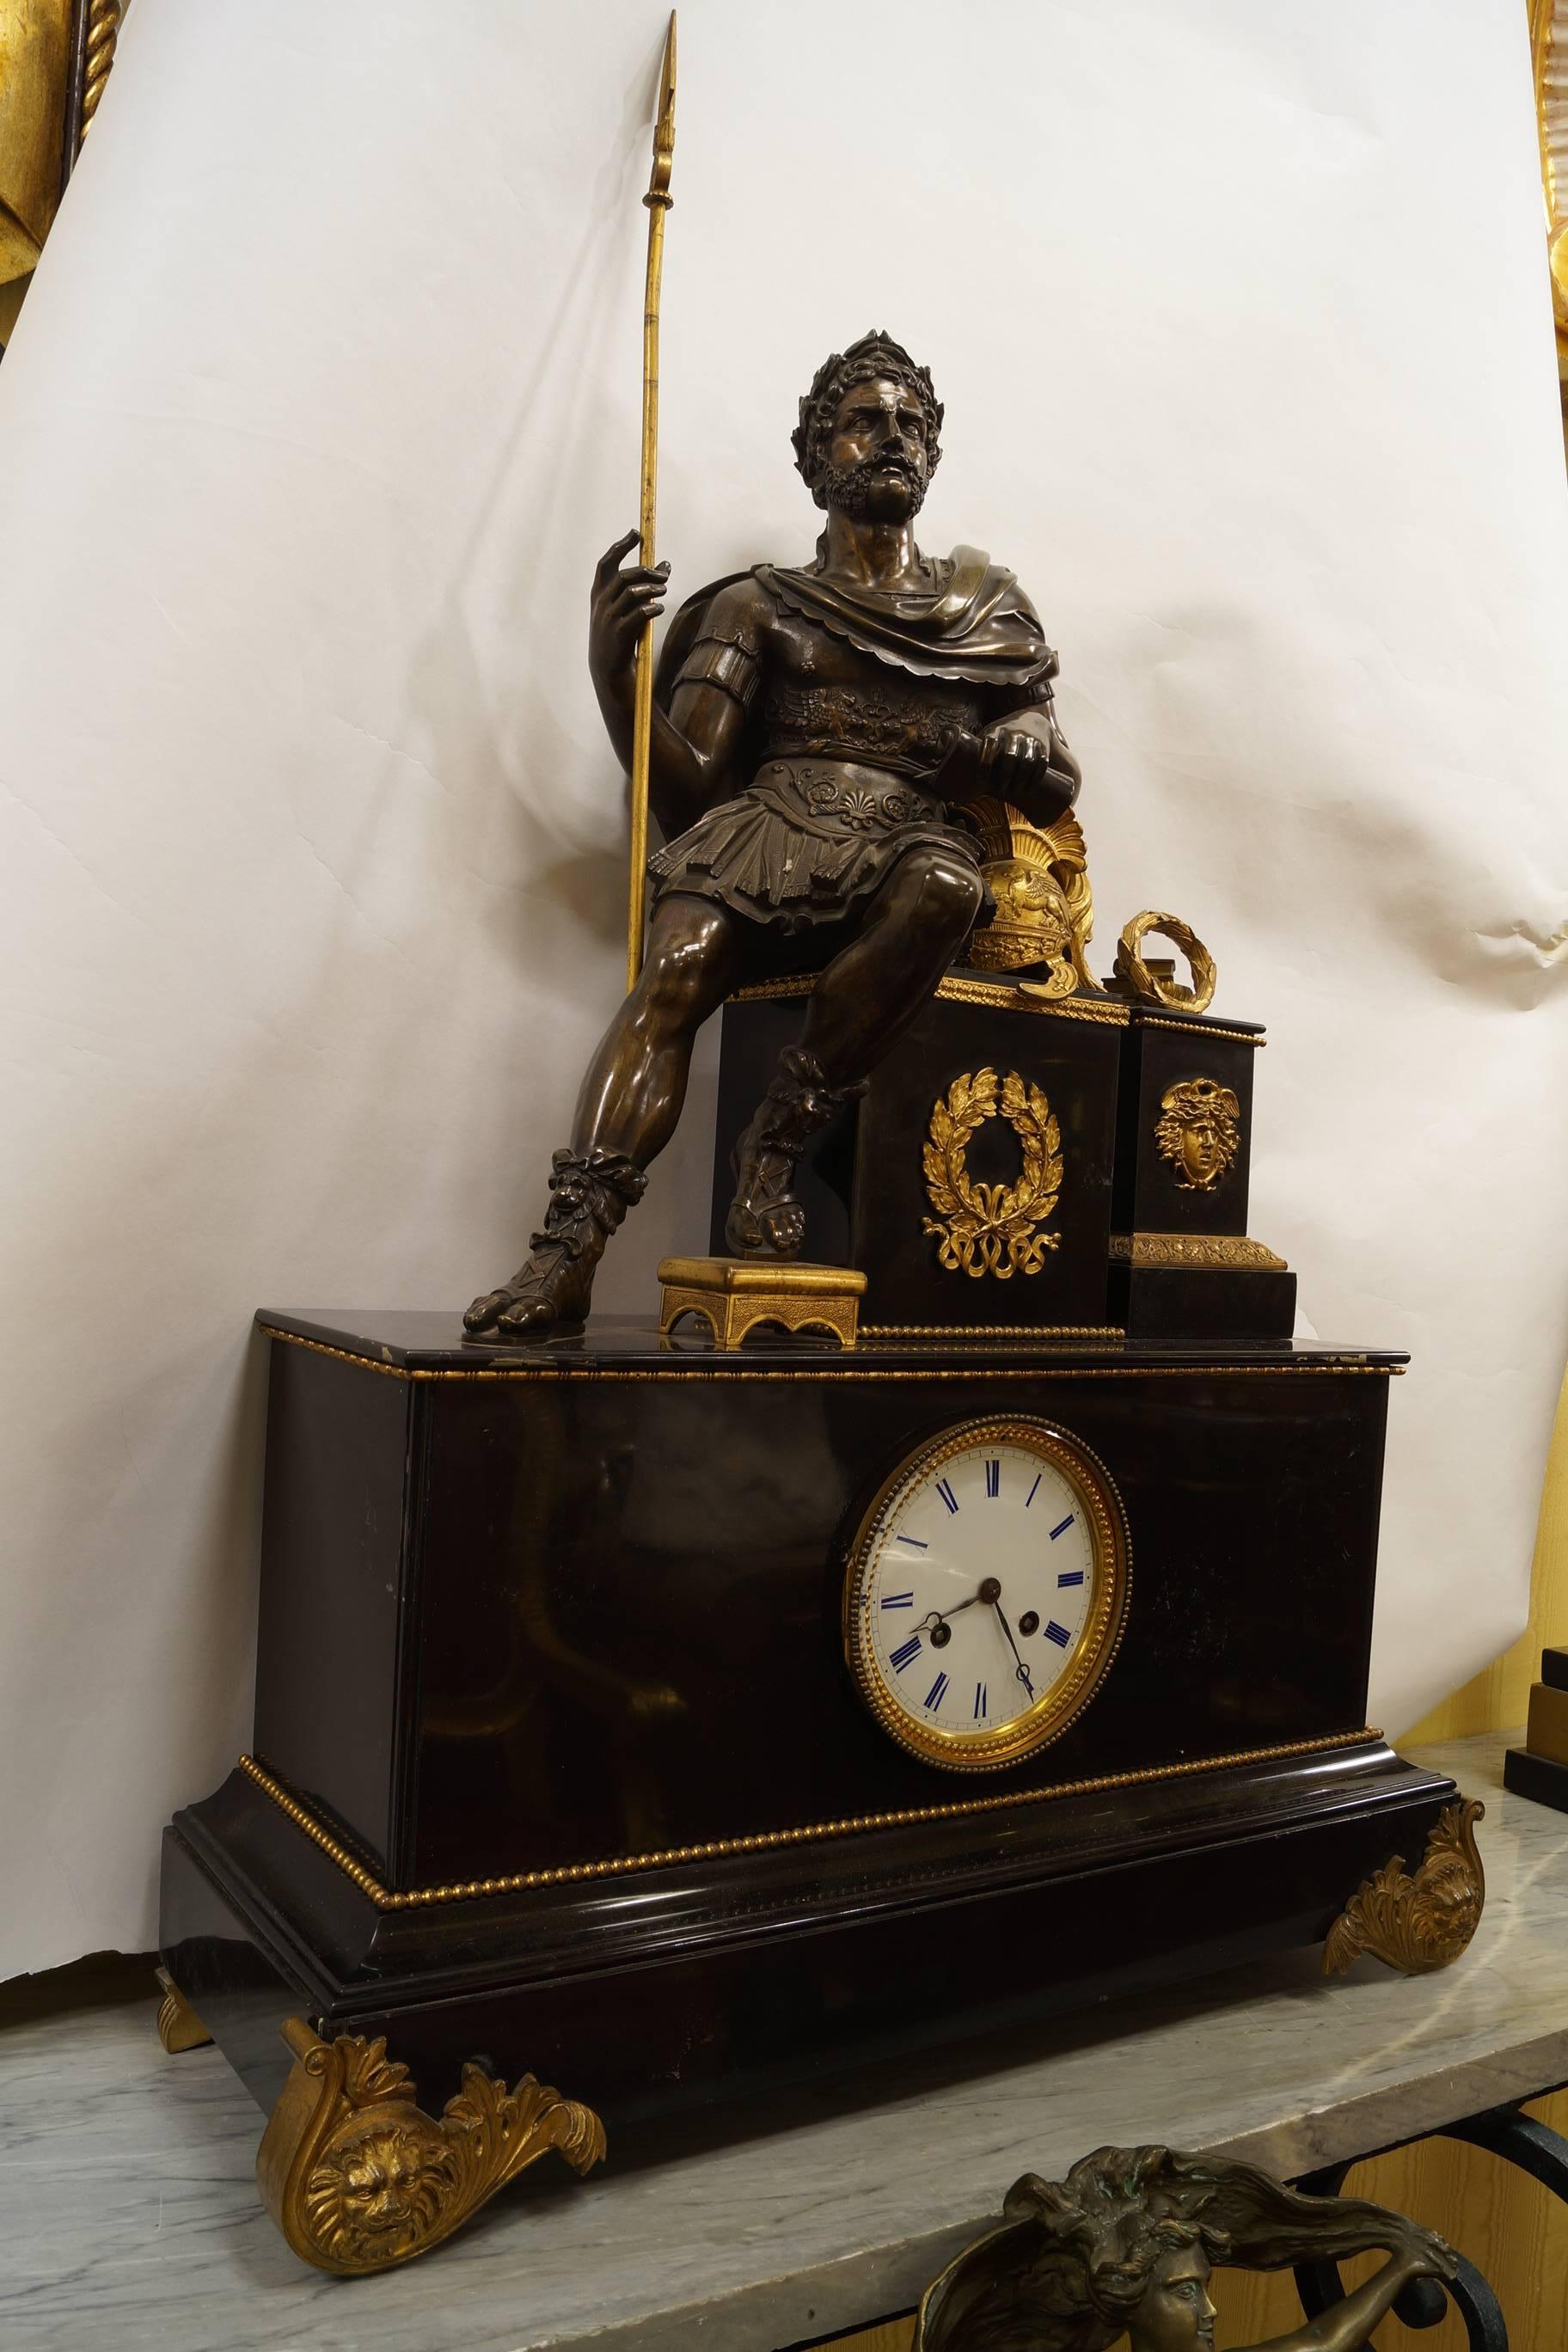 A very large French Empire style bronze figural mantel clock with seated Roman soldier of very fine quality casting.
Stock Number: CC54.